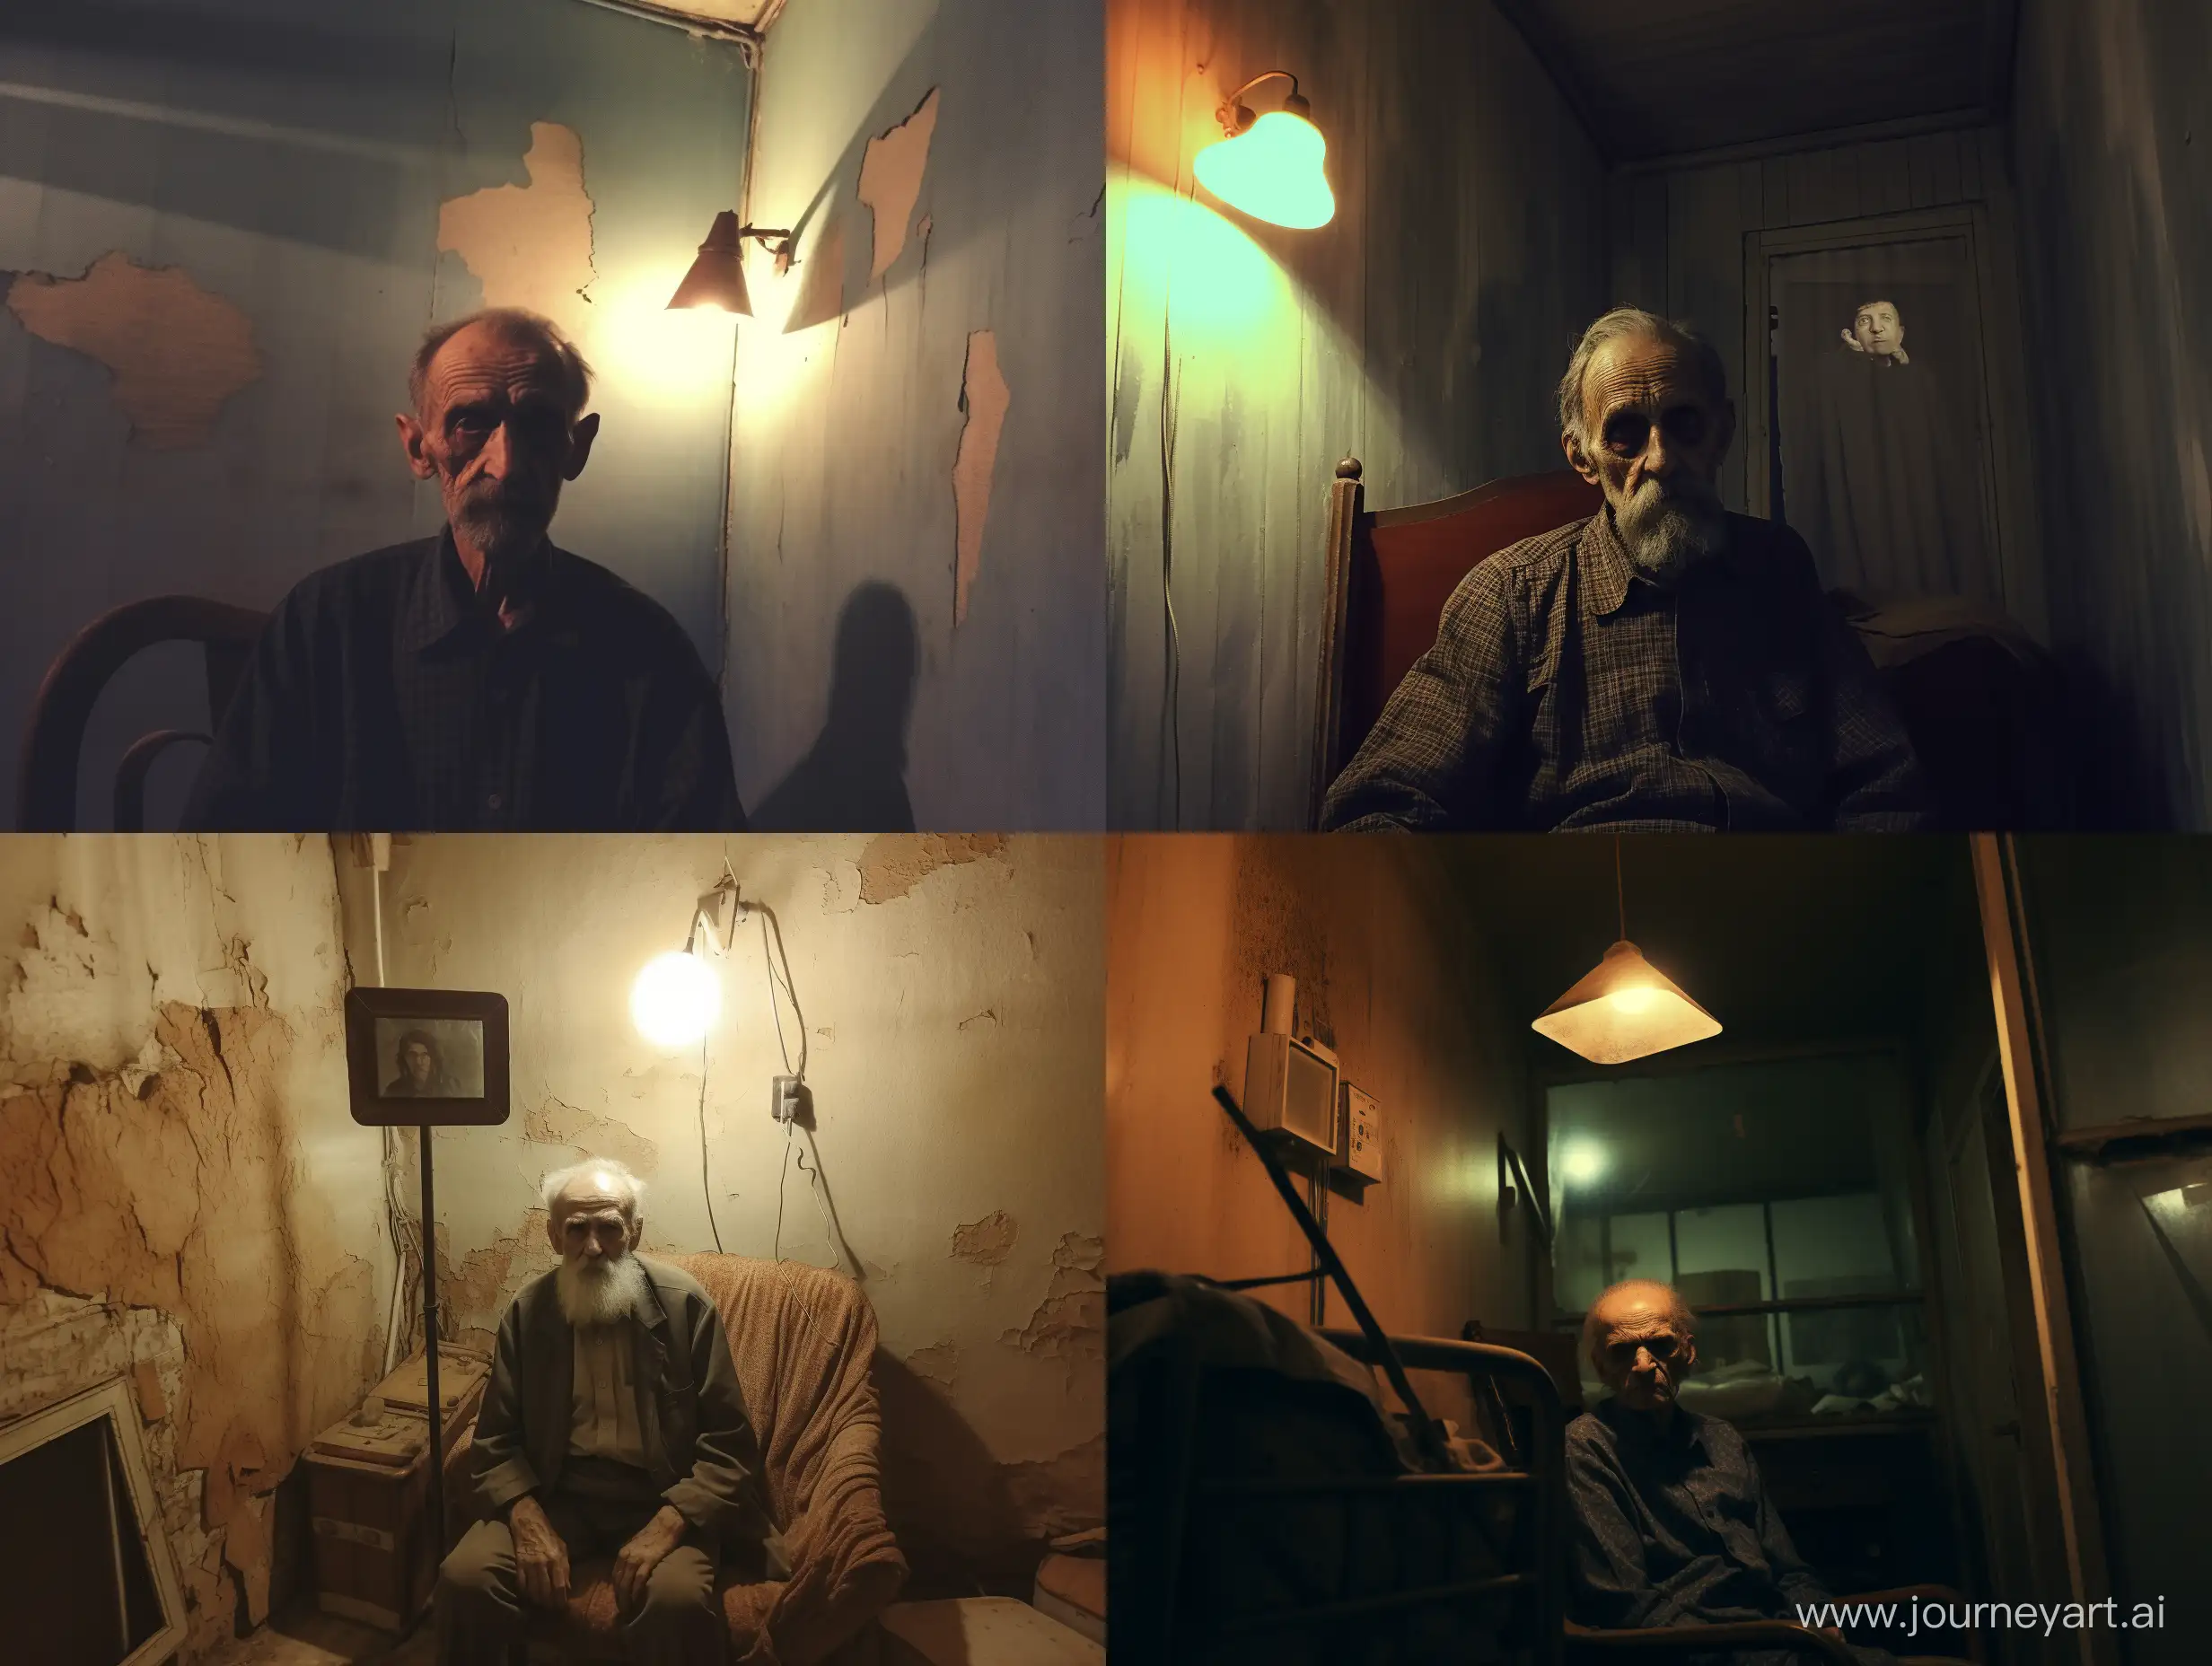 bad quality web camera old man's photo. Scene: background apartment dirty wall. Warm lamp light ambient